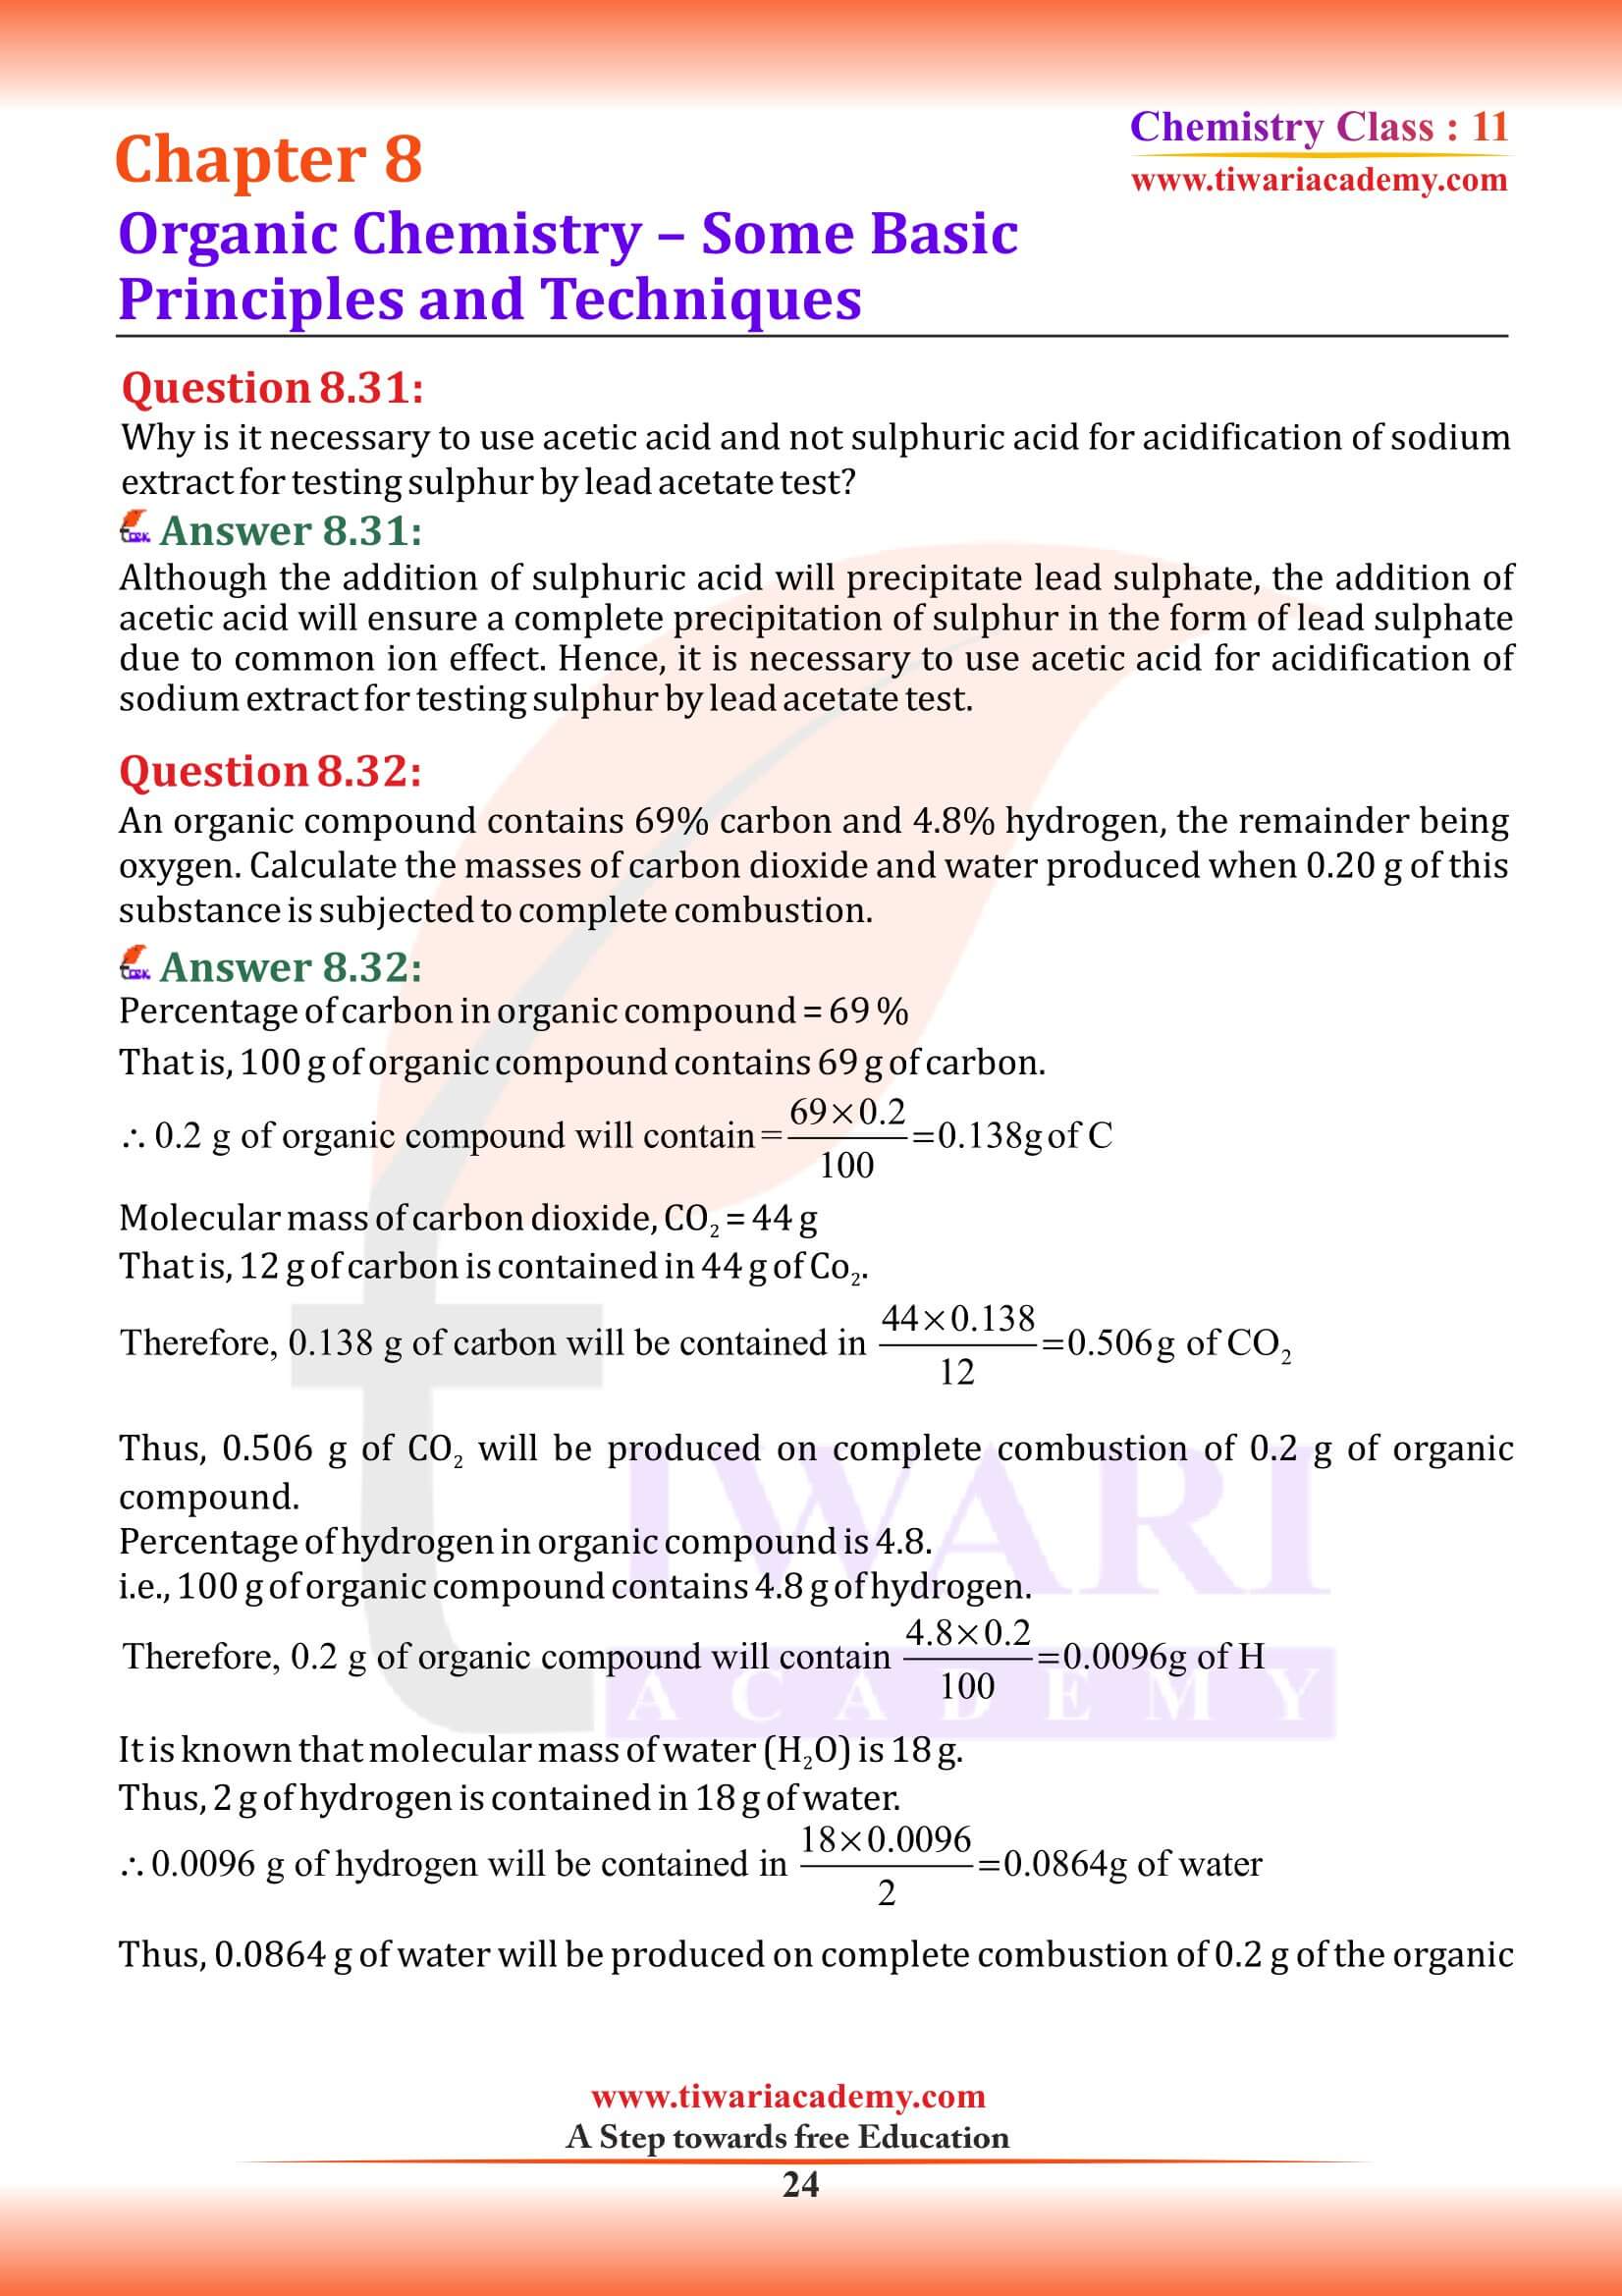 Class 11 Chemistry Chapter 8 NCERT book solutions